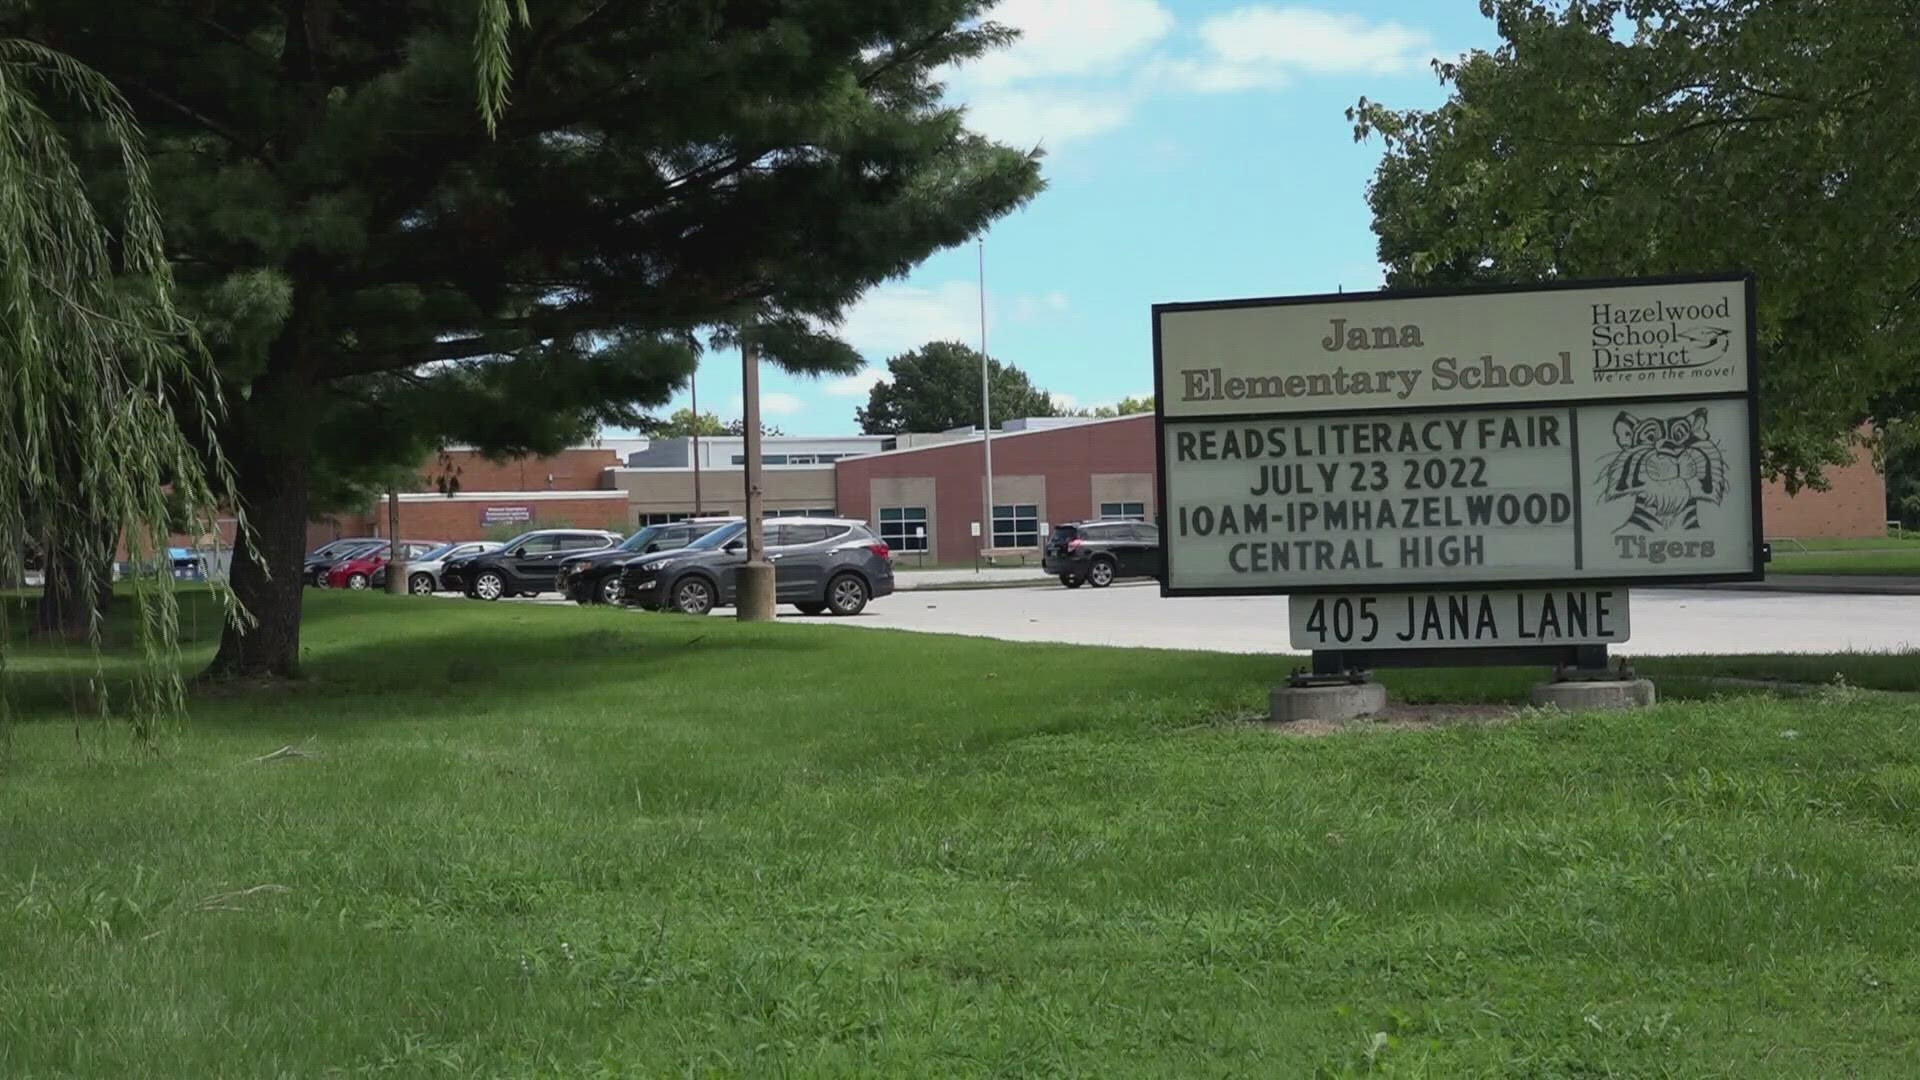 After passing in the Senate, RECA is headed to the U.S. House. The discovery of contamination at Jana Elementary was at the center of the push for compensation.